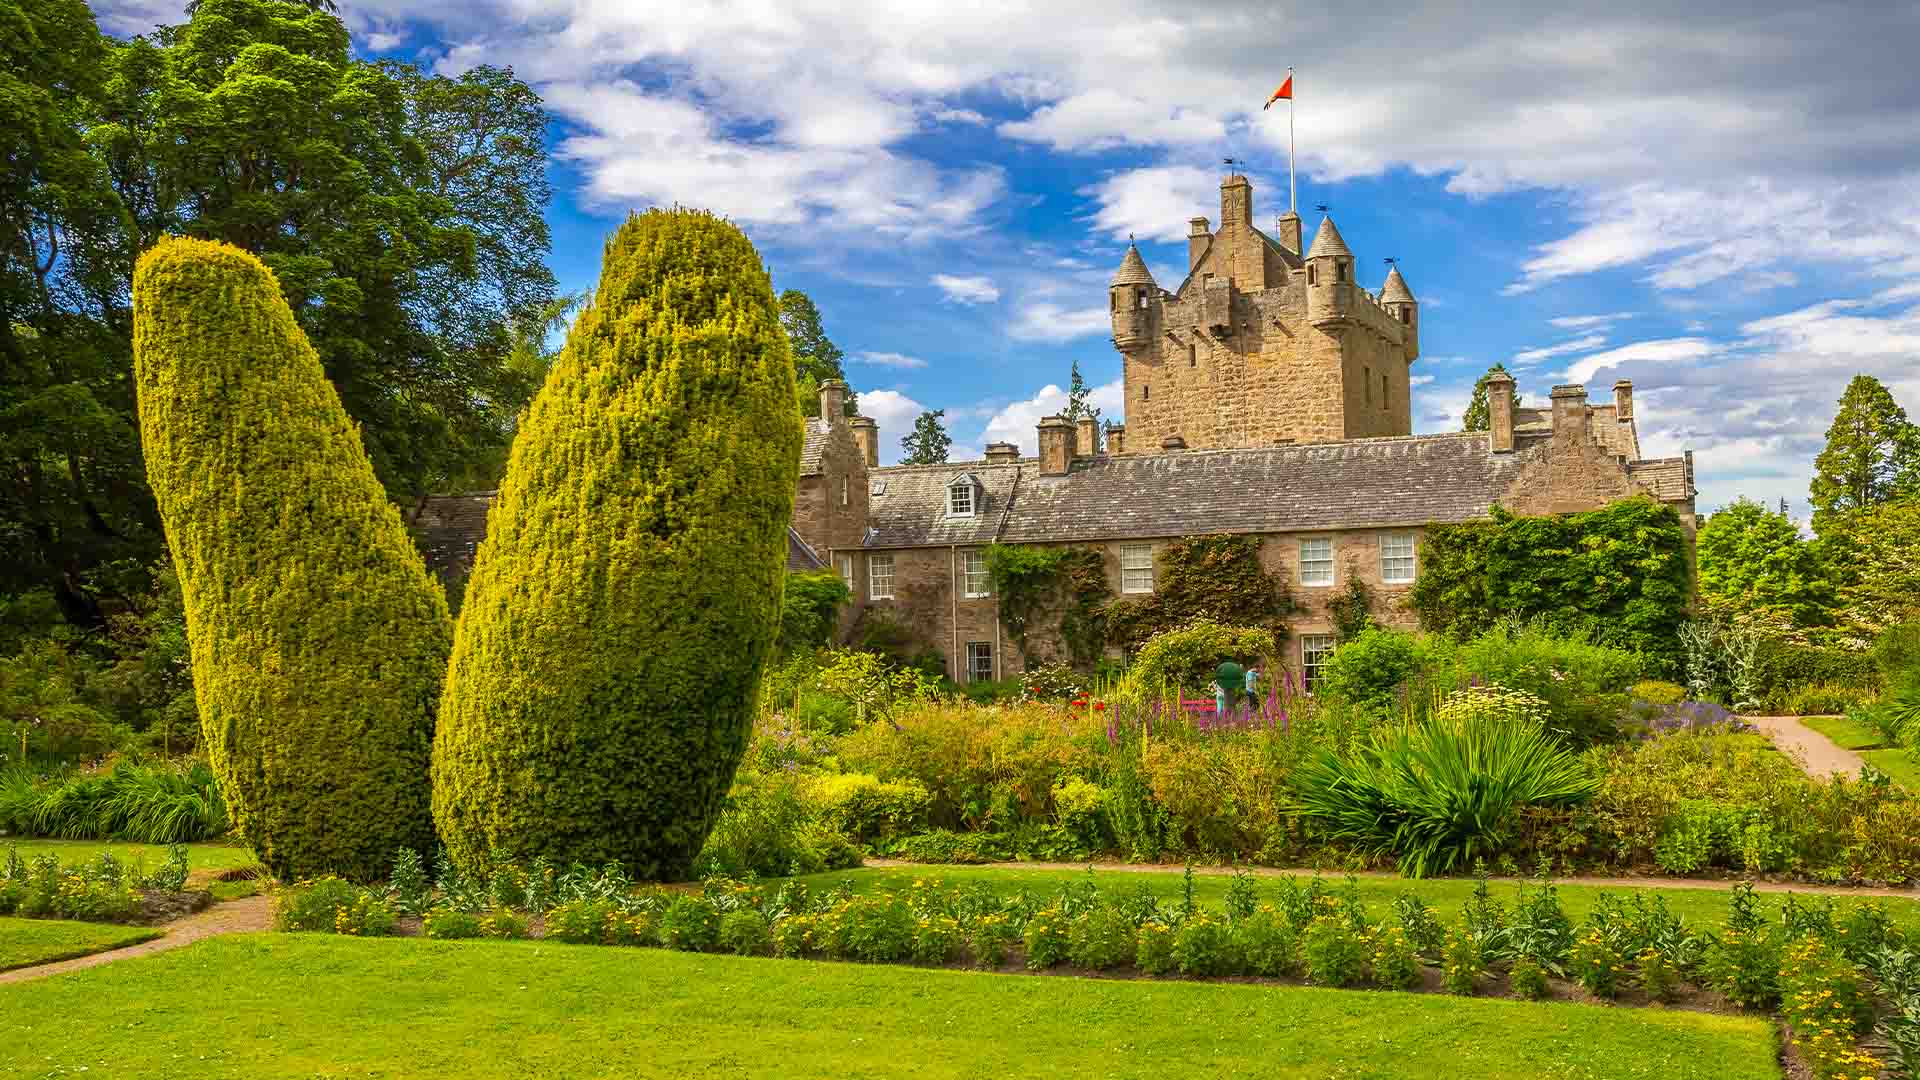 Cawdor Castle from the outside